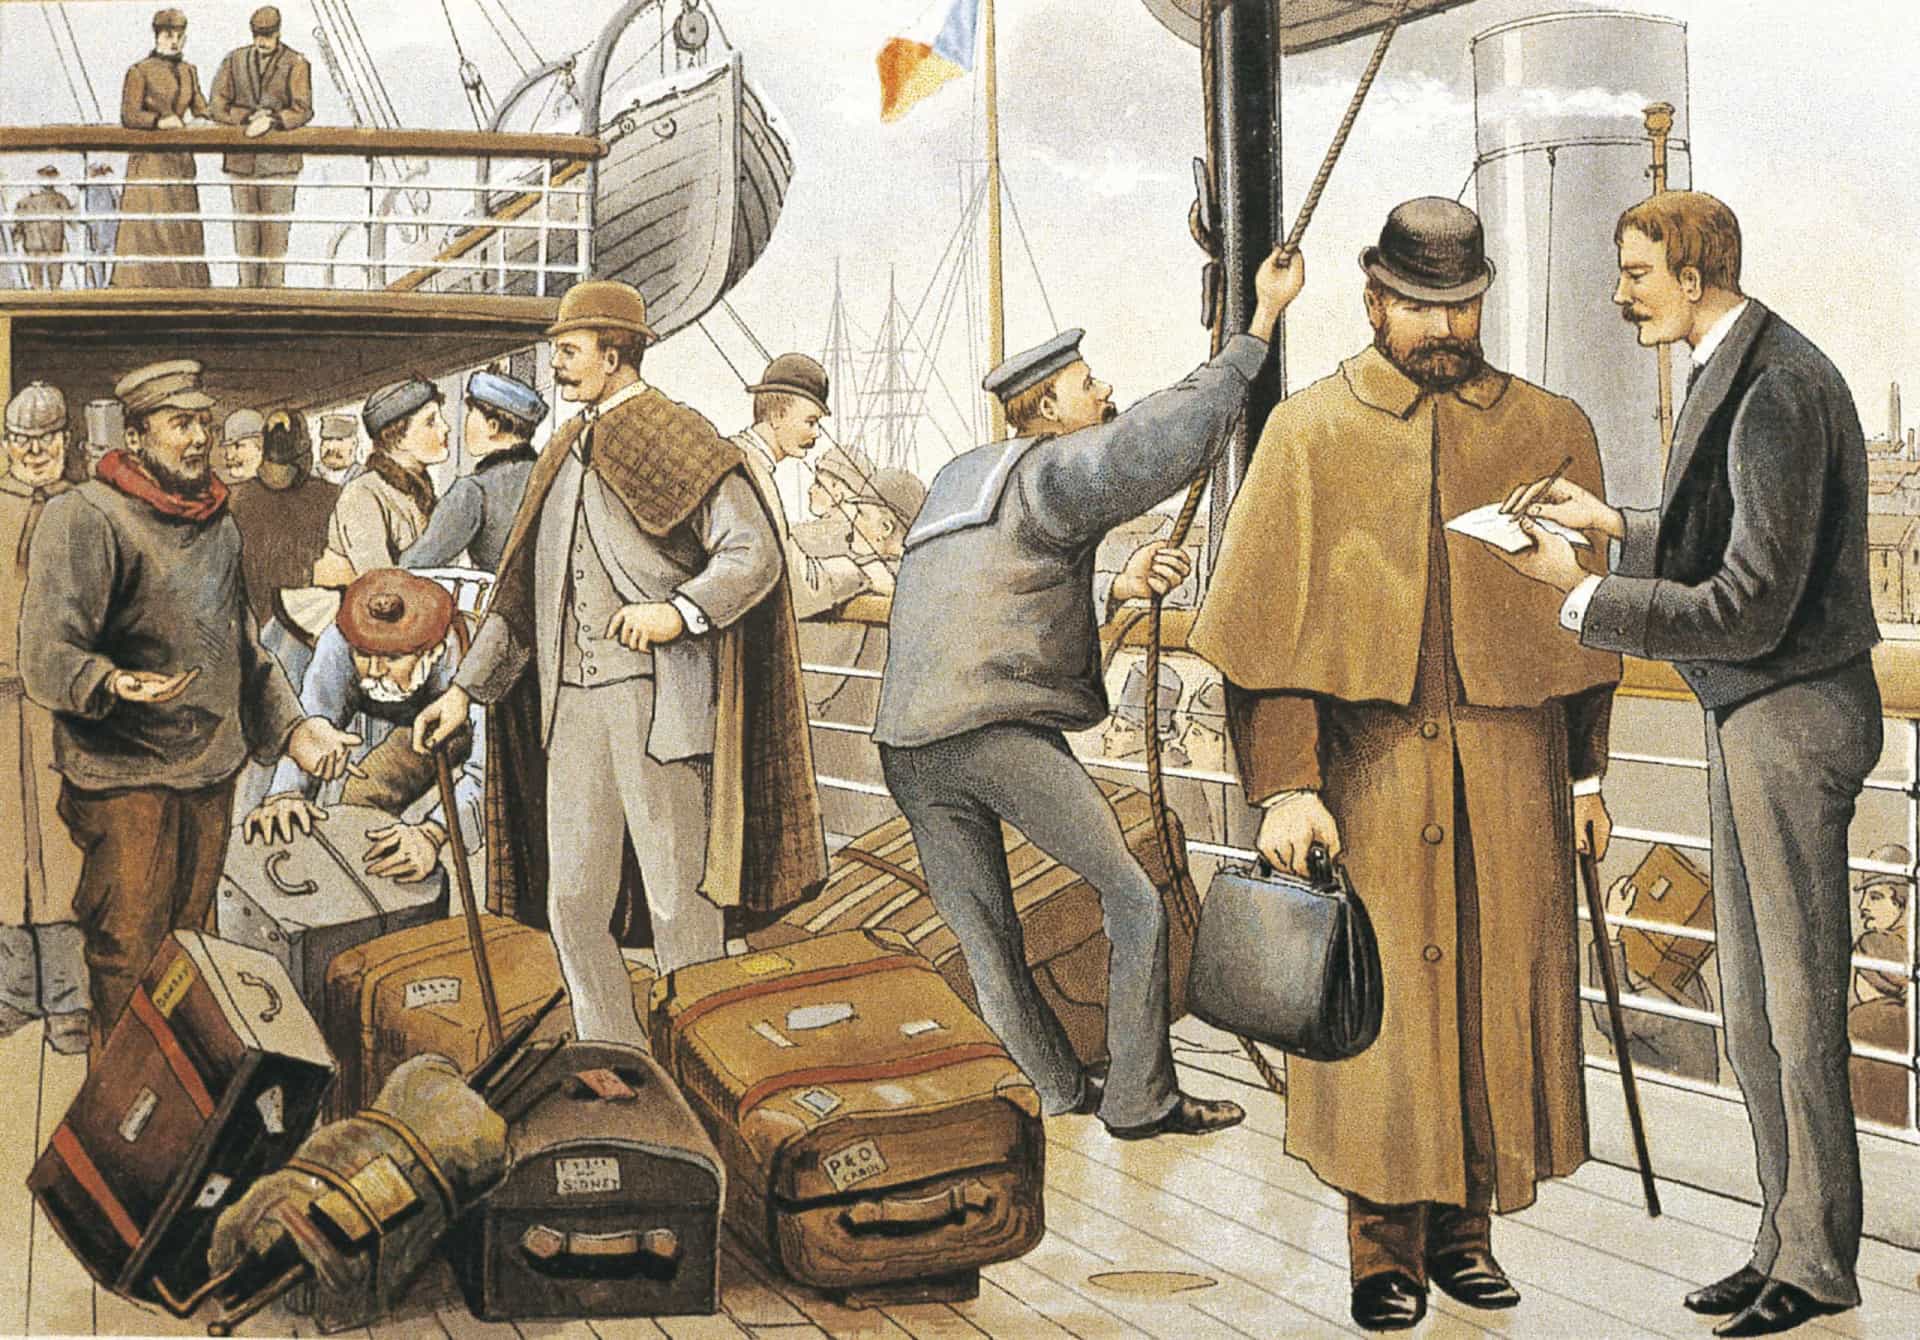 <p>Journeys that were once considered purely functional were being marketed as now being for pleasure. But the prohibitive cost of a voyage meant that a cruise liner vacation remained a privilege of the wealthy.</p><p><a href="https://www.msn.com/en-za/community/channel/vid-7xx8mnucu55yw63we9va2gwr7uihbxwc68fxqp25x6tg4ftibpra?cvid=94631541bc0f4f89bfd59158d696ad7e">Follow us and access great exclusive content every day</a></p>